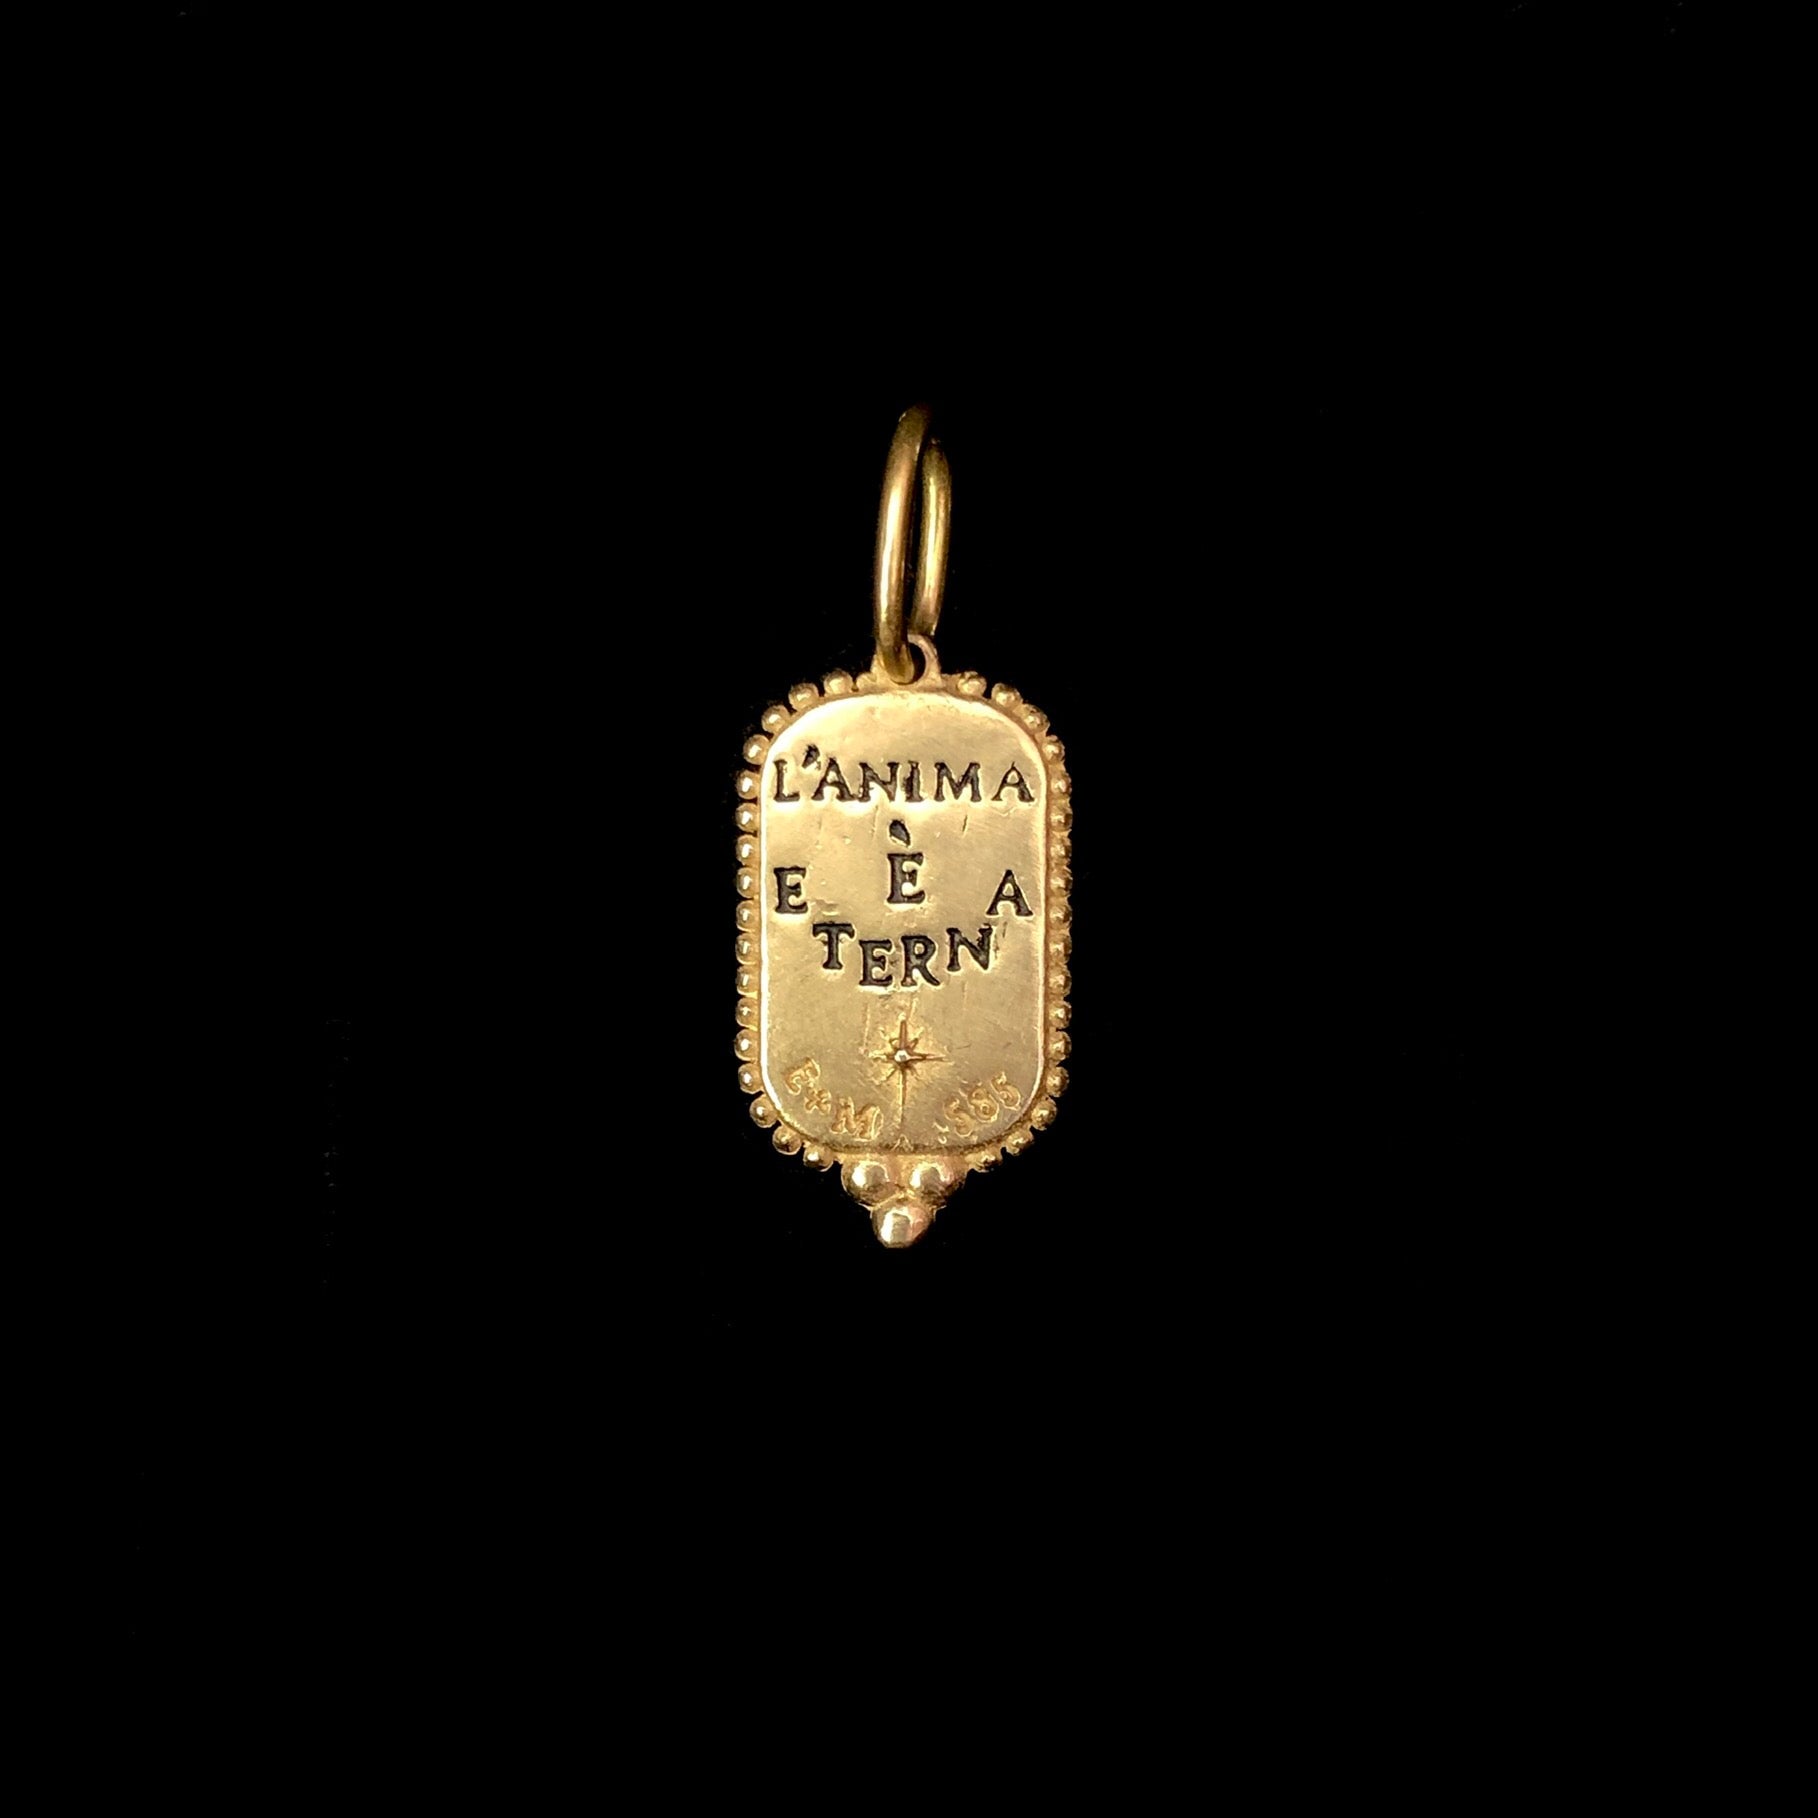 Back view of Small Man in the Moon Charm with impressed words L'ANIMA E ETERNA